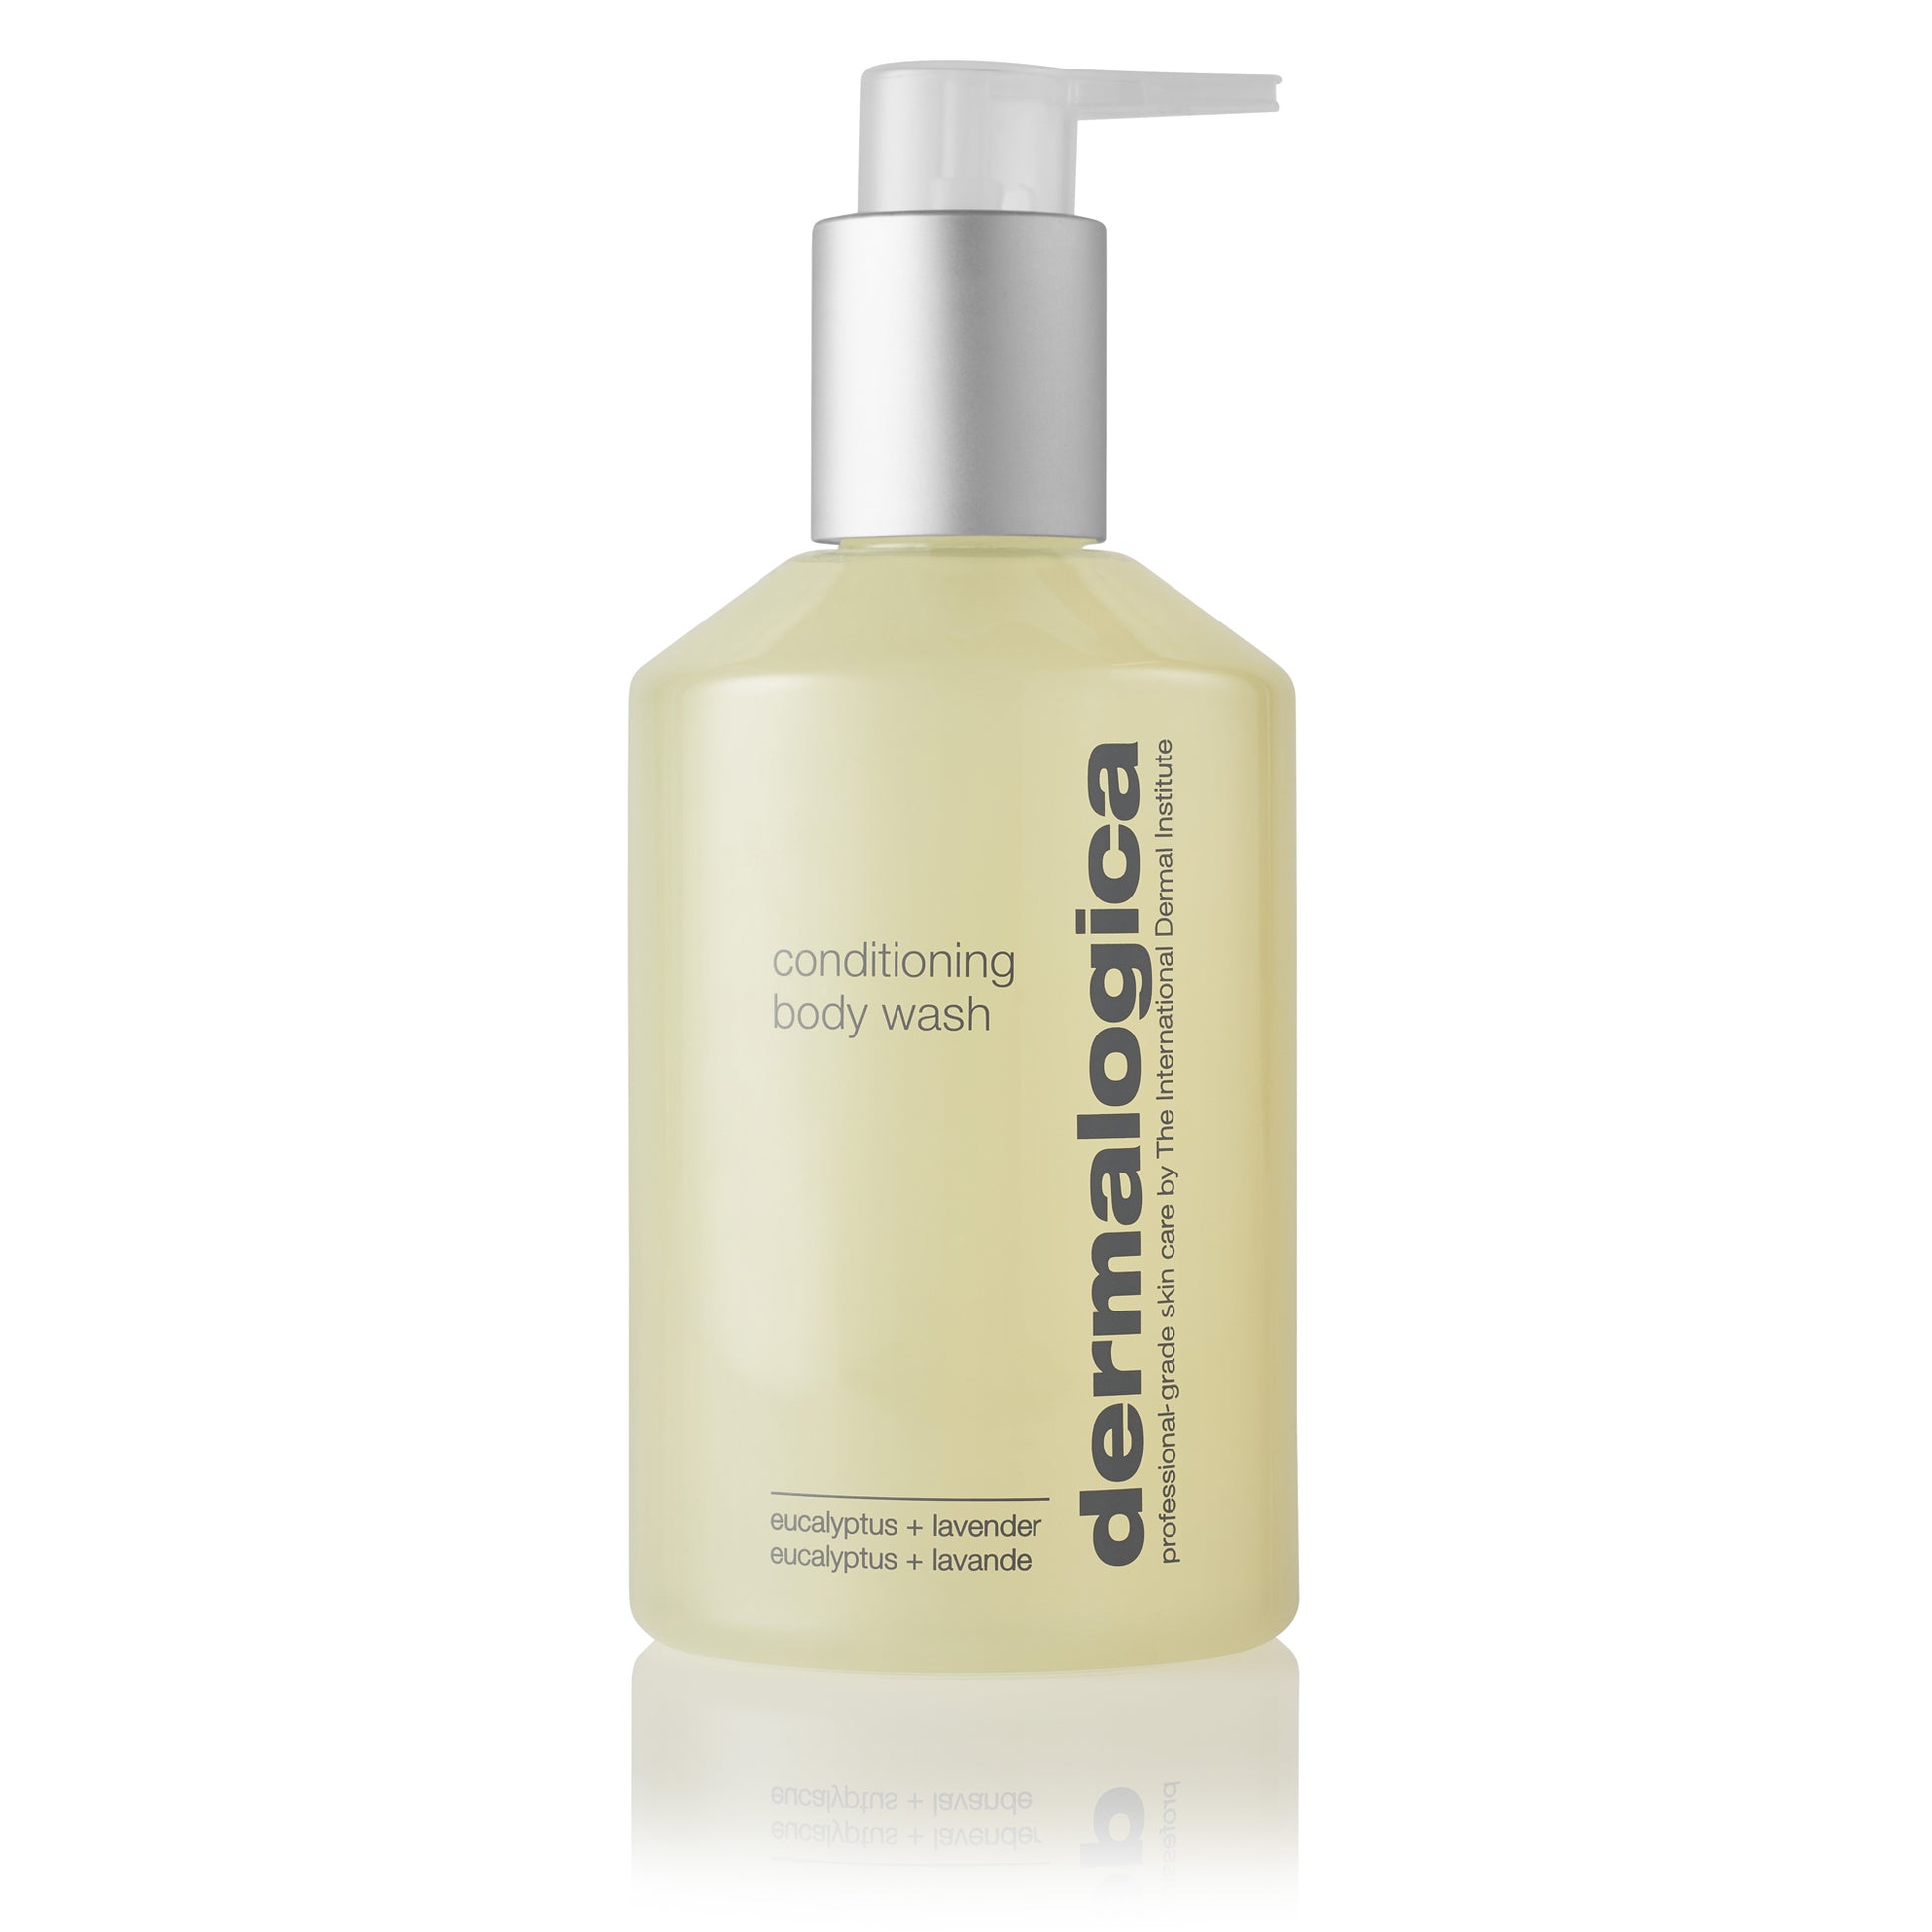 Dermalogica Body Conditioning Wash product front